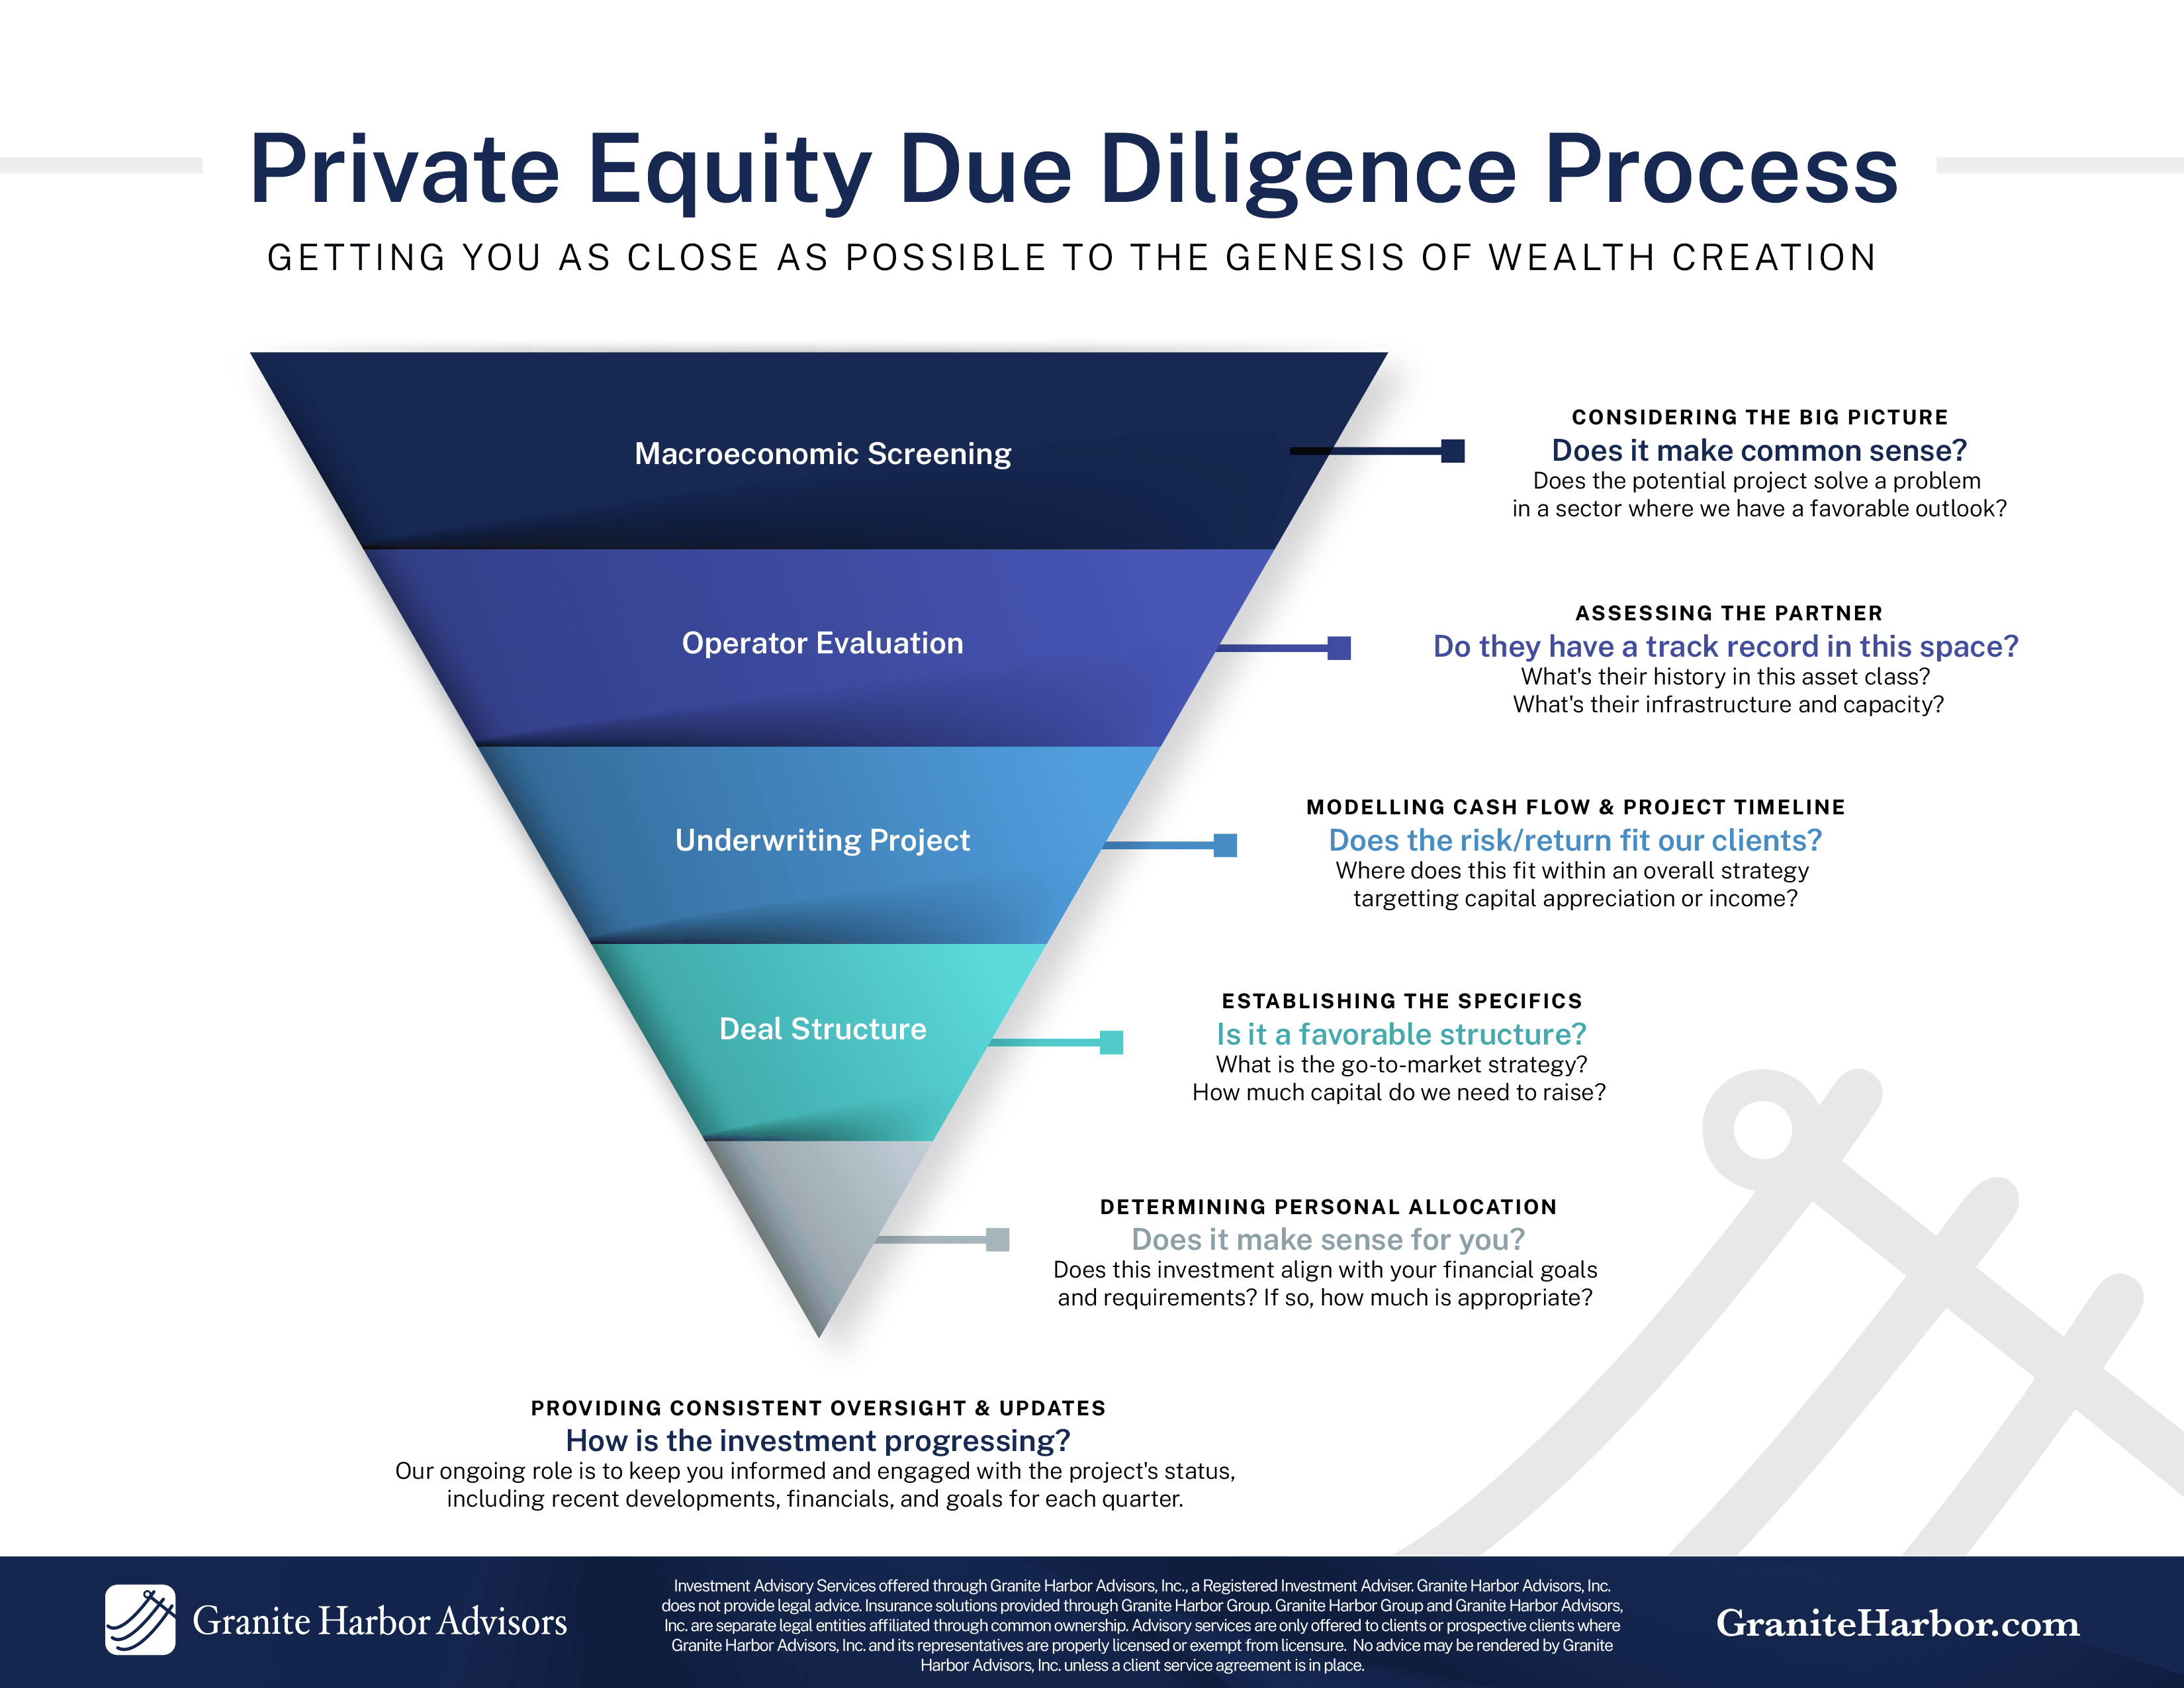 A Comprehensive Guide to the Private Equity Due Diligence Process